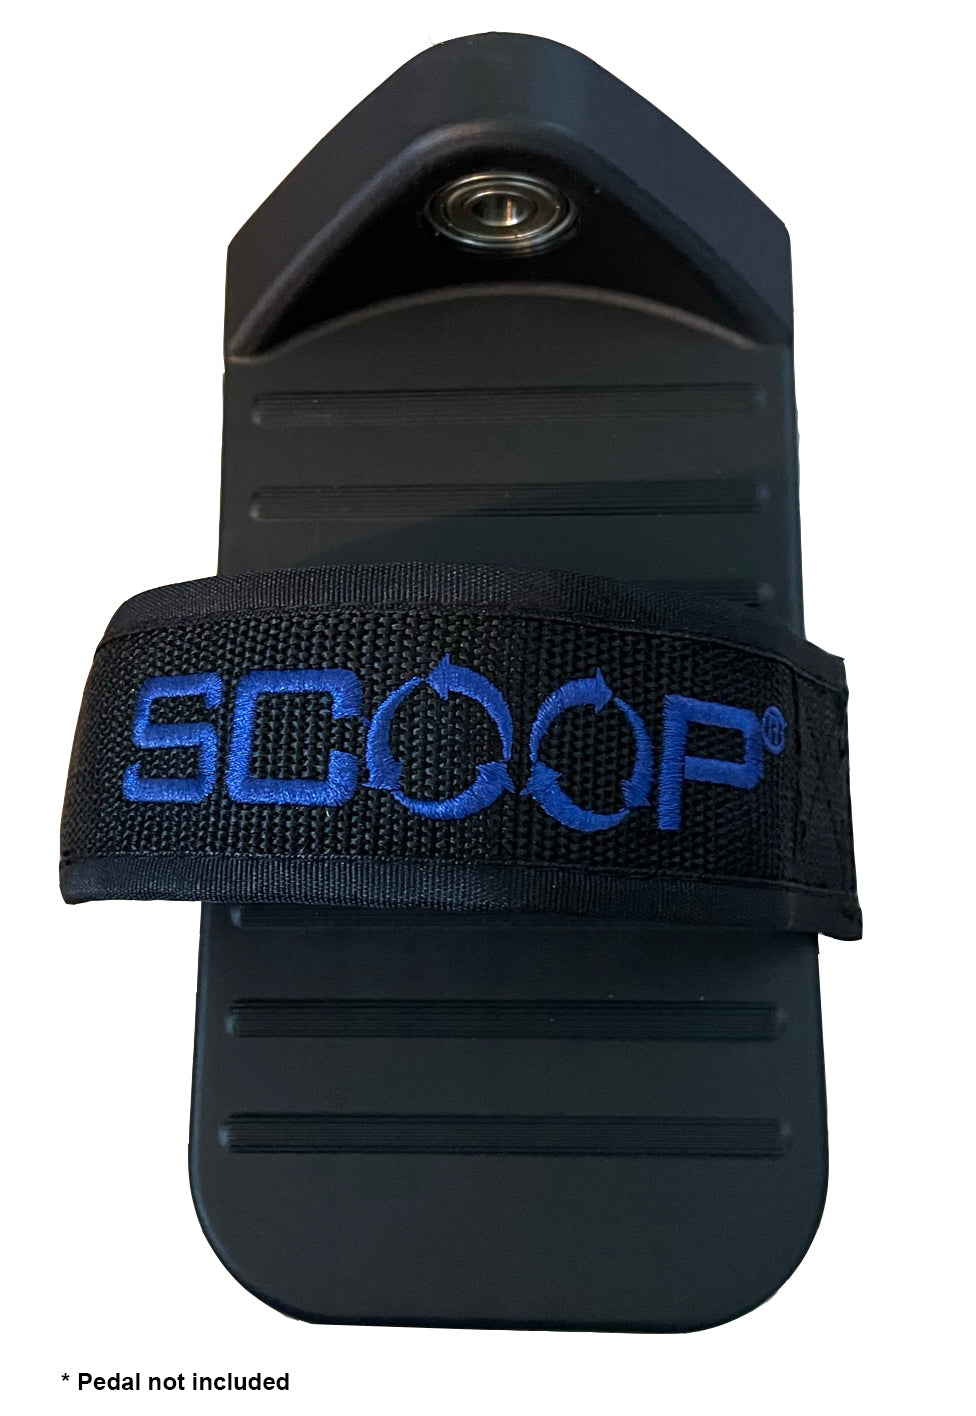 Pedal Upgrade for Scoop®:  Adjustable Velcro Straps for Standard Sized Pedals